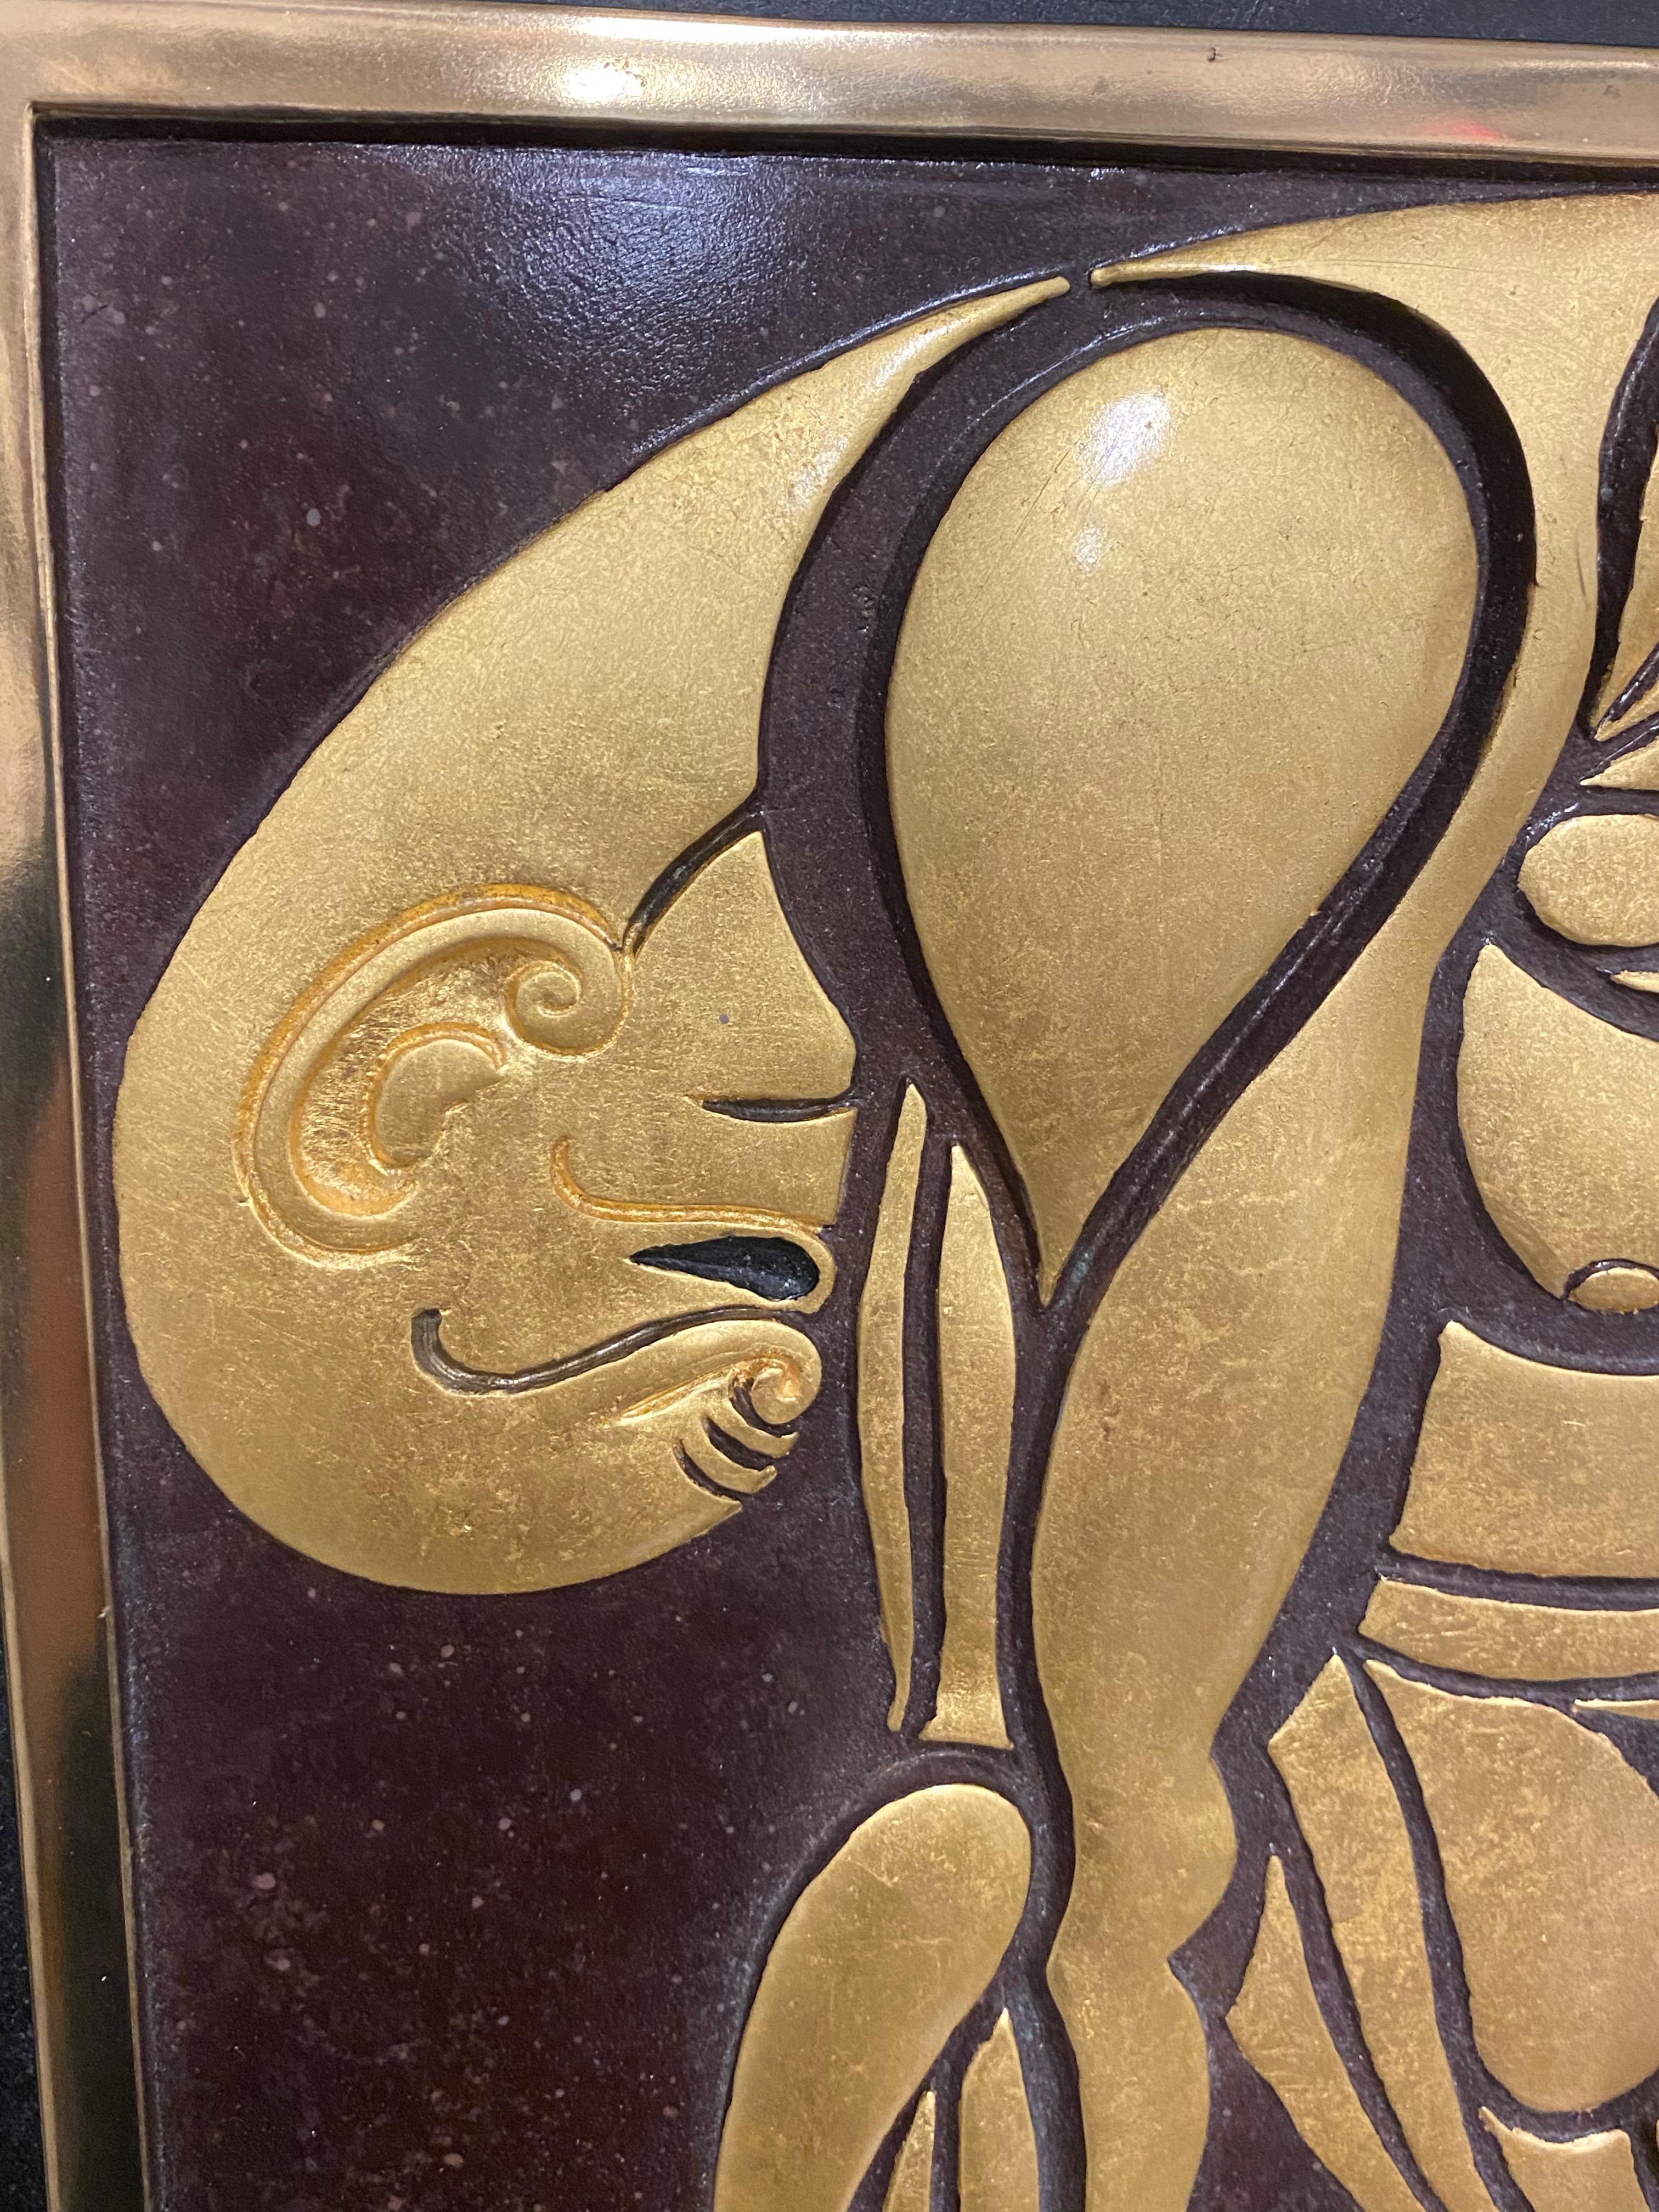 Signed Erte Wall Sculpture of Samson and Delilah Romain Tirtoff Art In Excellent Condition For Sale In North Bergen, NJ